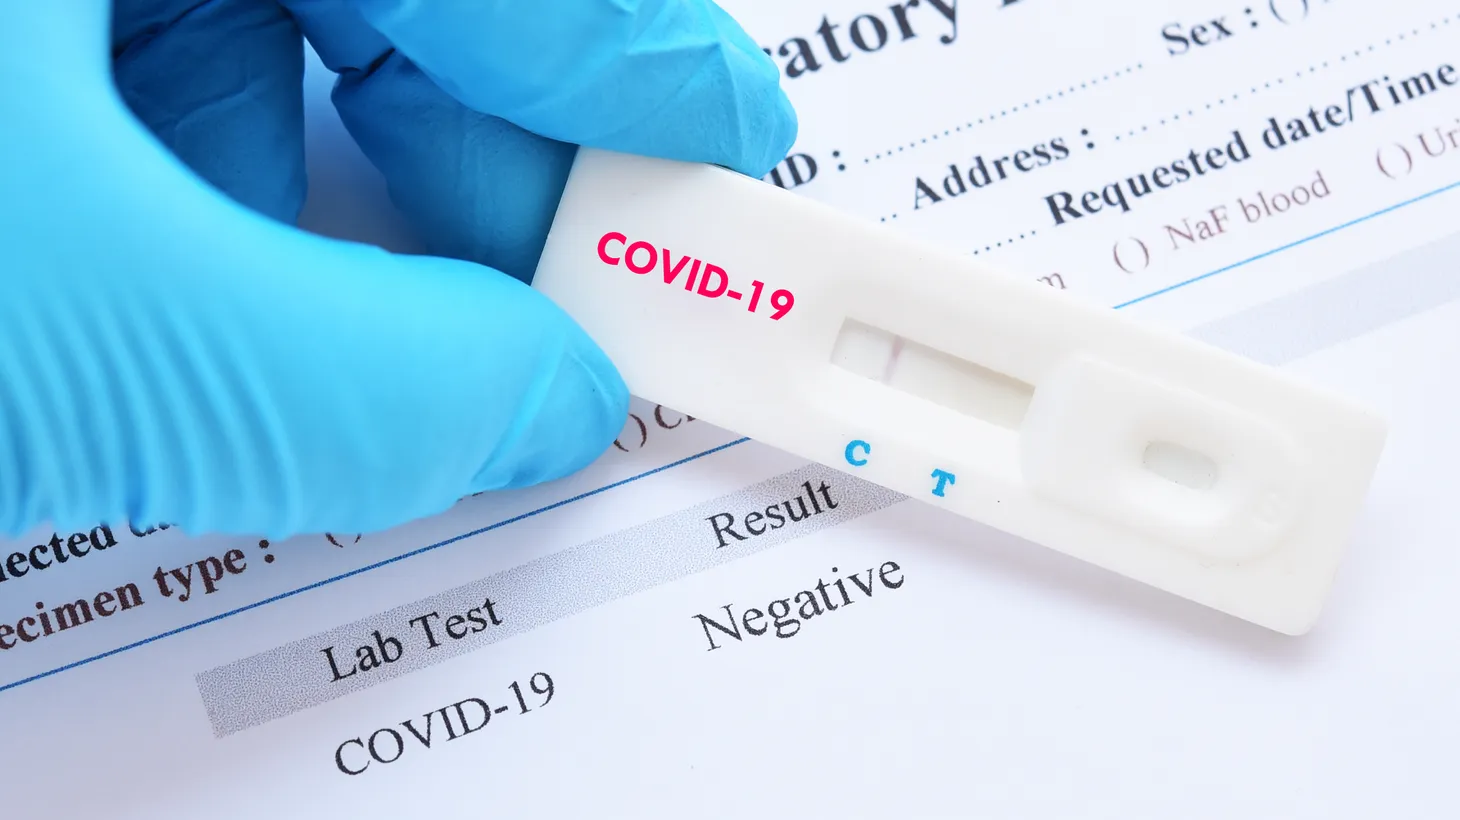 “With the new variant … people, especially vaccinated people, were more likely to see false negative home tests early in an infection, that then were turning positive a few days … after symptomatic illnesses started,” says Omai Garner, director of clinical microbiology for UCLA Health.